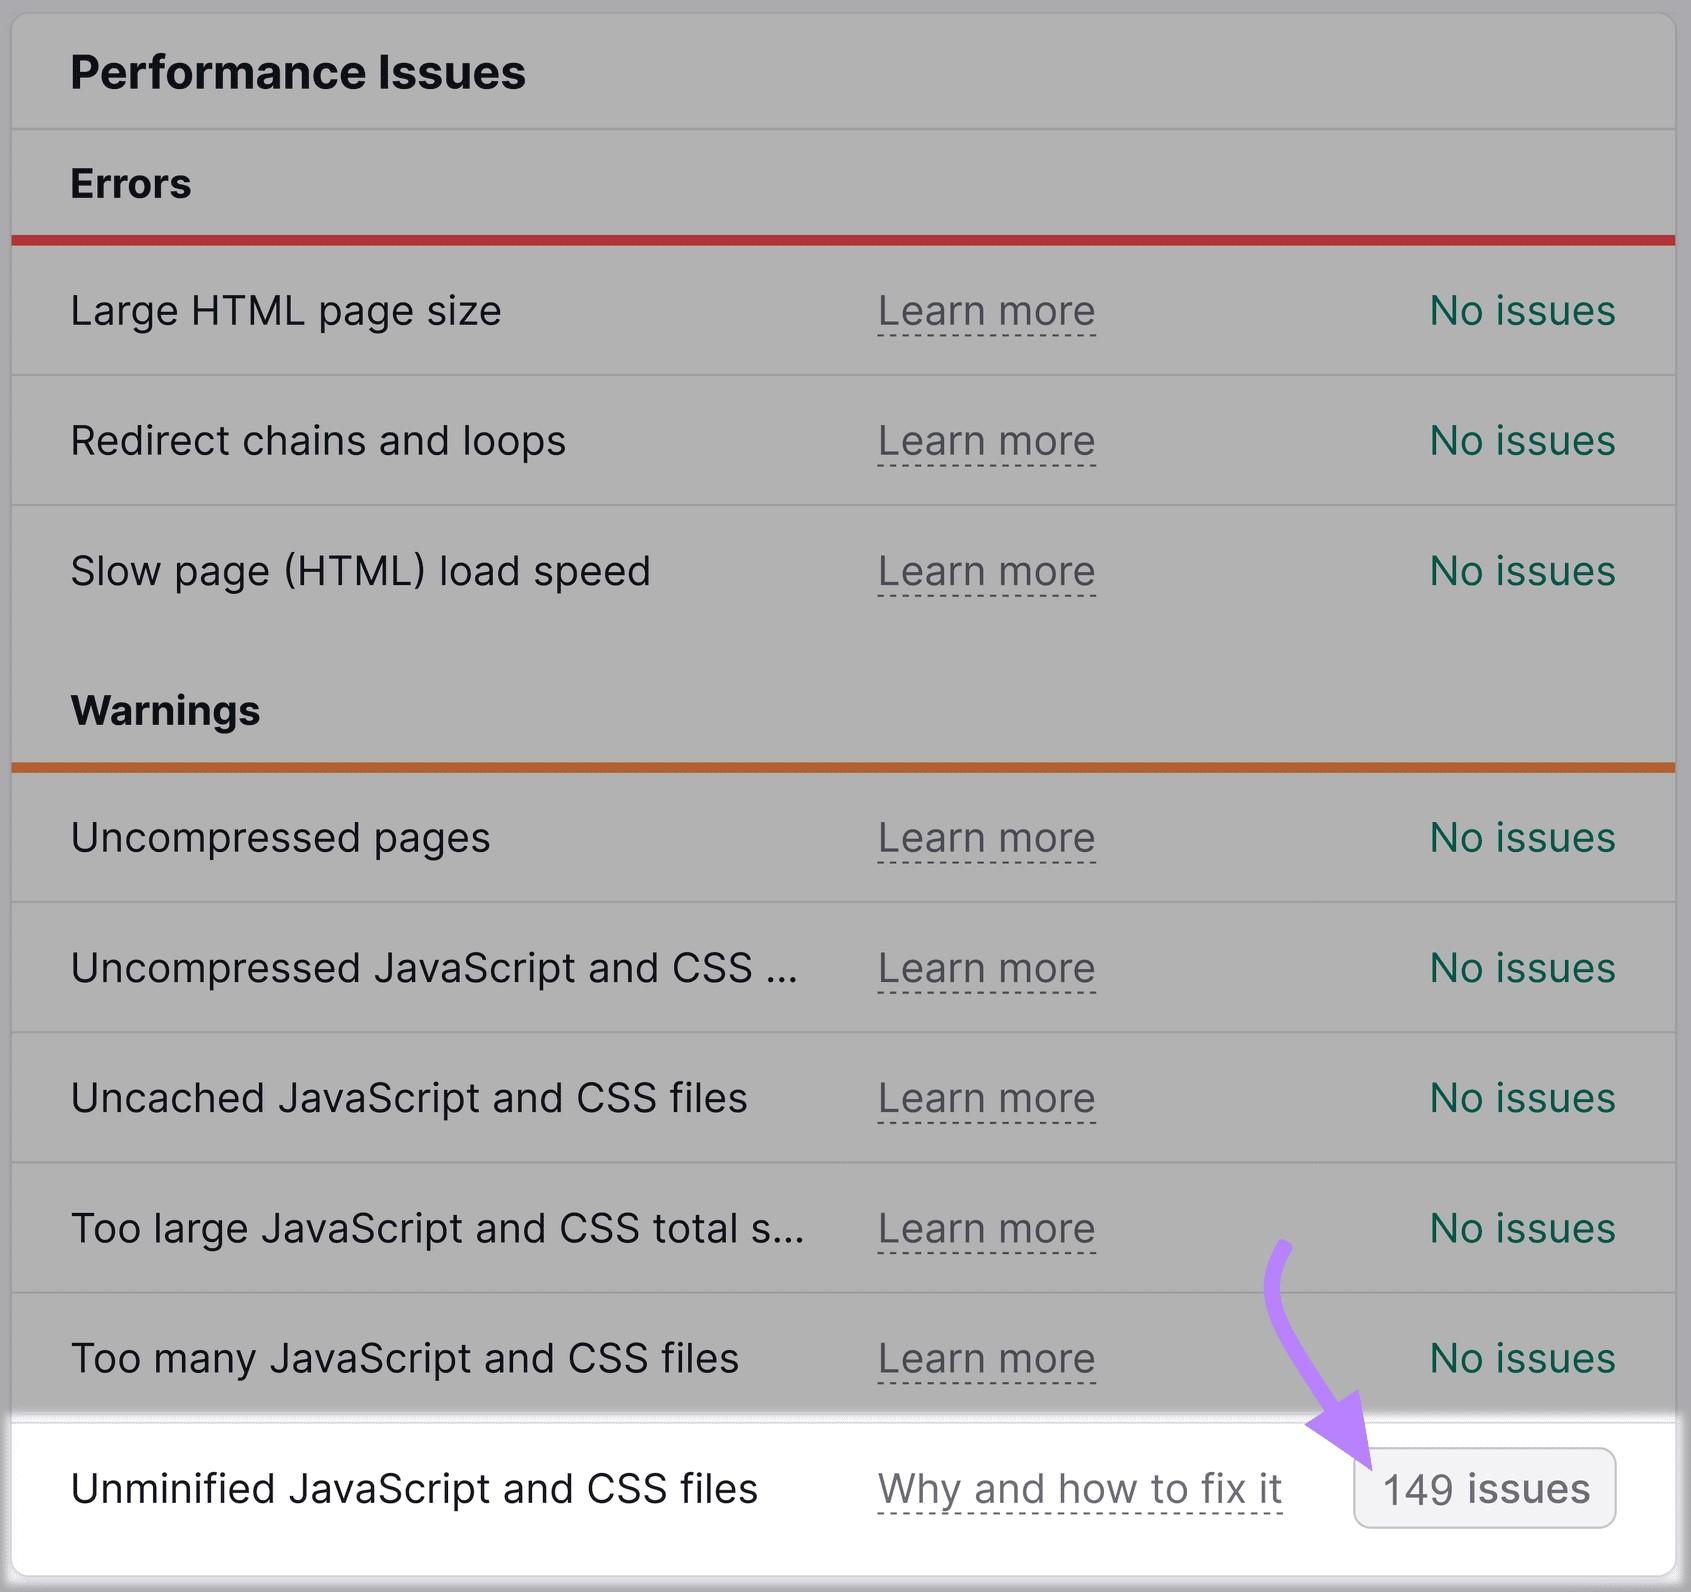 “Unminified JavaScript and CSS files” line highlighted under "Performance Issues” widget